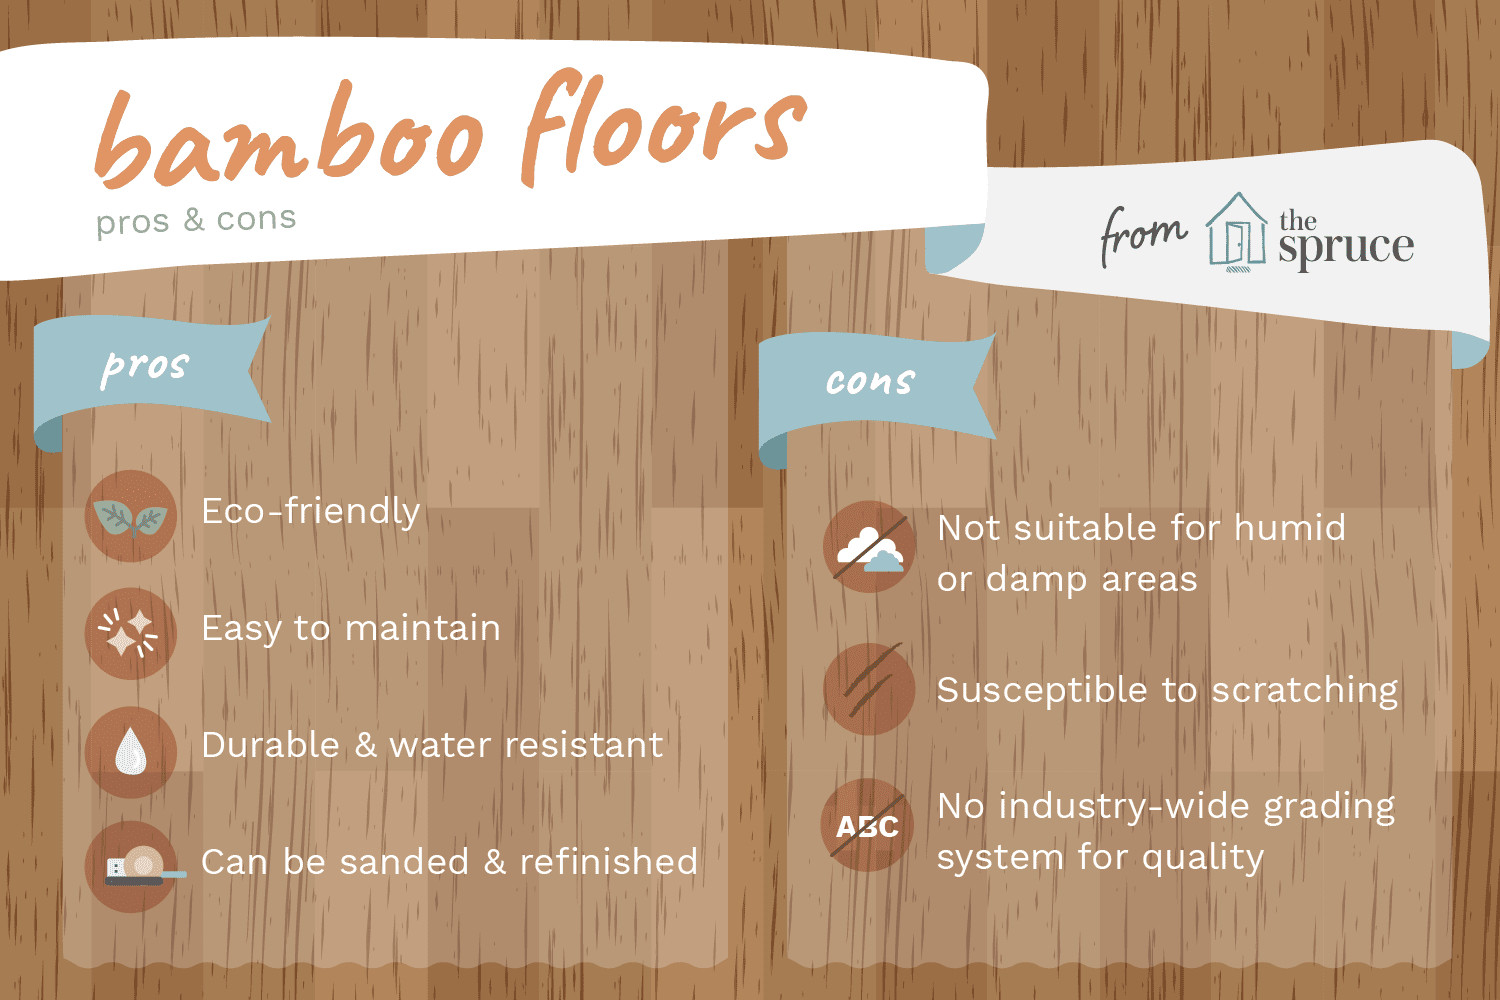 hardwood flooring hardness scale of the advantages and disadvantages of bamboo flooring throughout benefits and drawbacks of bamboo floors 1314694 v3 5b102fccff1b780036c0a4fa